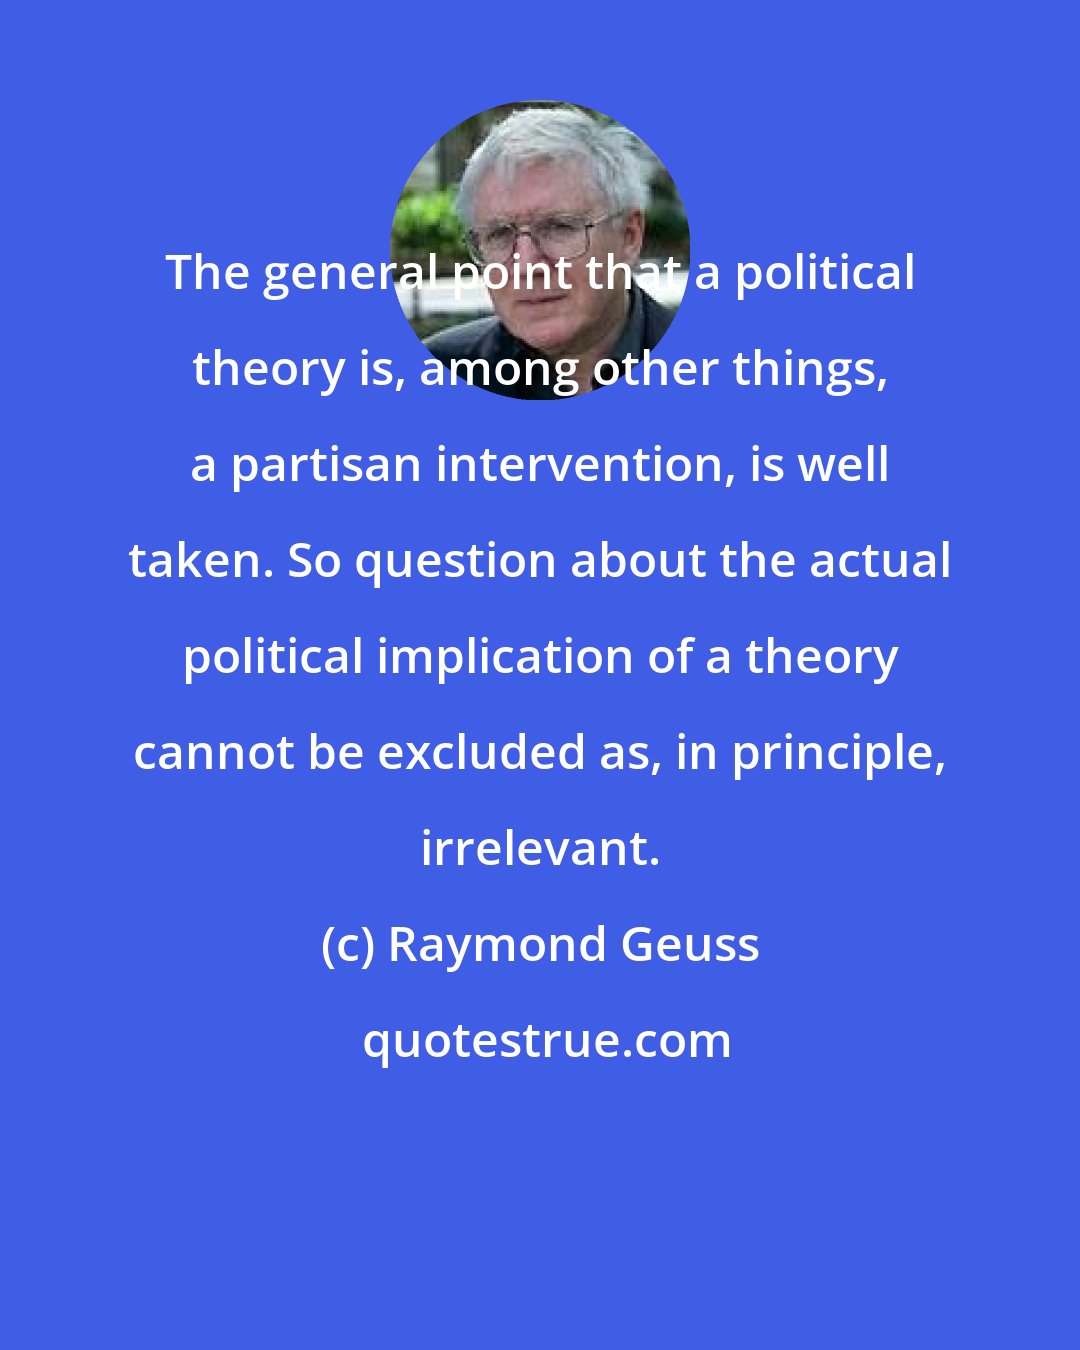 Raymond Geuss: The general point that a political theory is, among other things, a partisan intervention, is well taken. So question about the actual political implication of a theory cannot be excluded as, in principle, irrelevant.